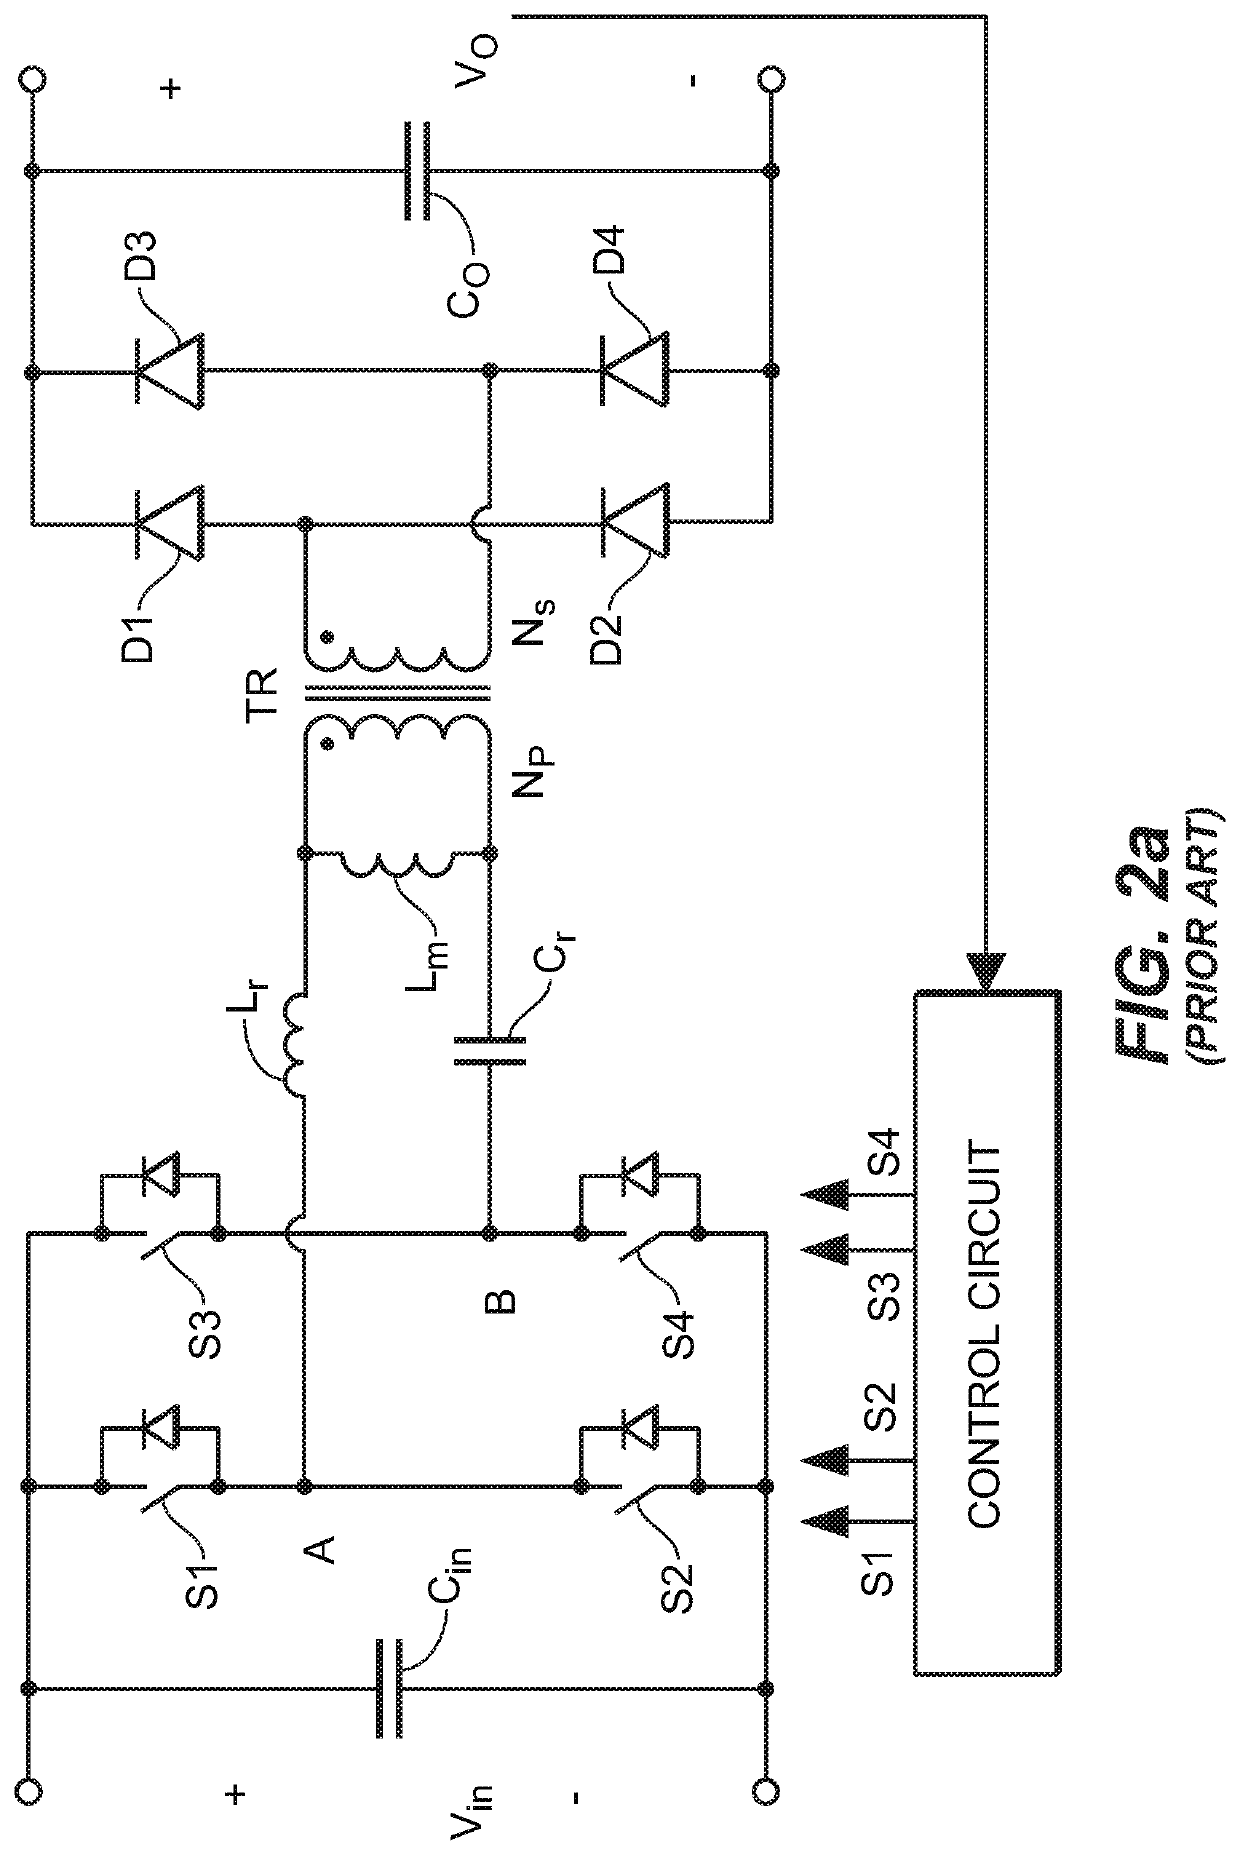 Three-level modulation for wide output voltage range isolated dc/dc converters